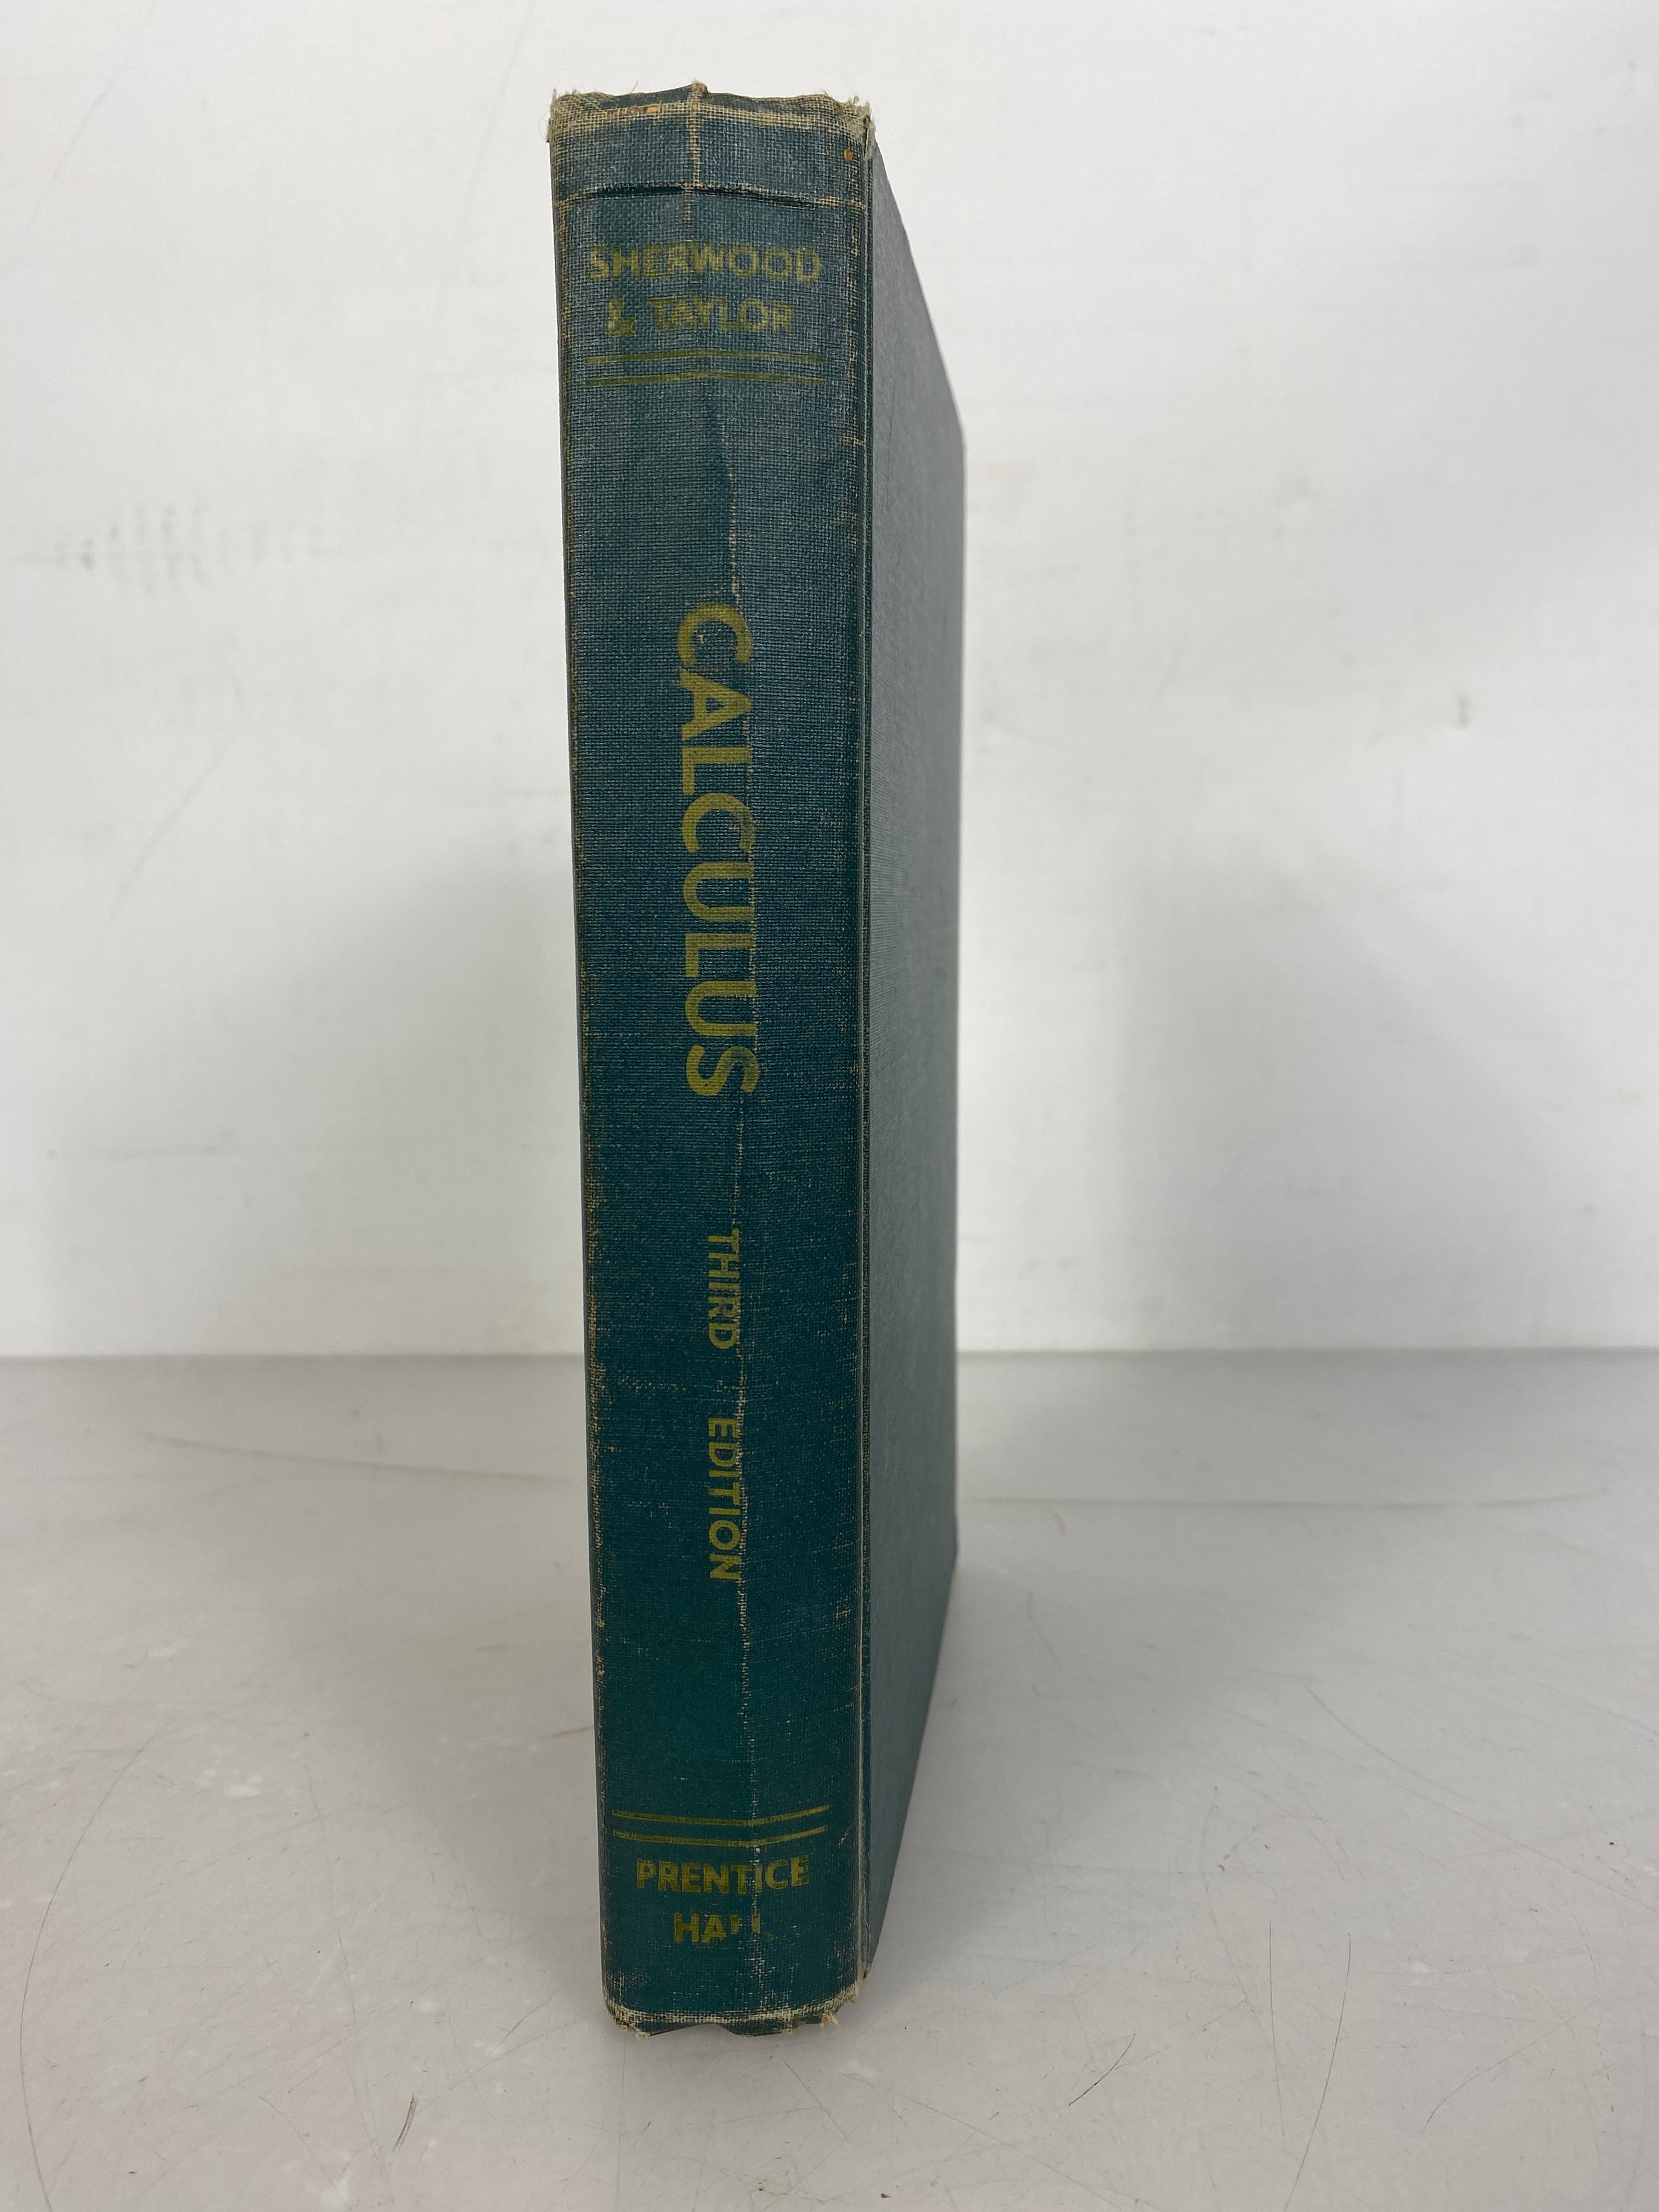 Calculus by G.E.F. Sherwood and Angus Taylor Third Edition 1958 HC